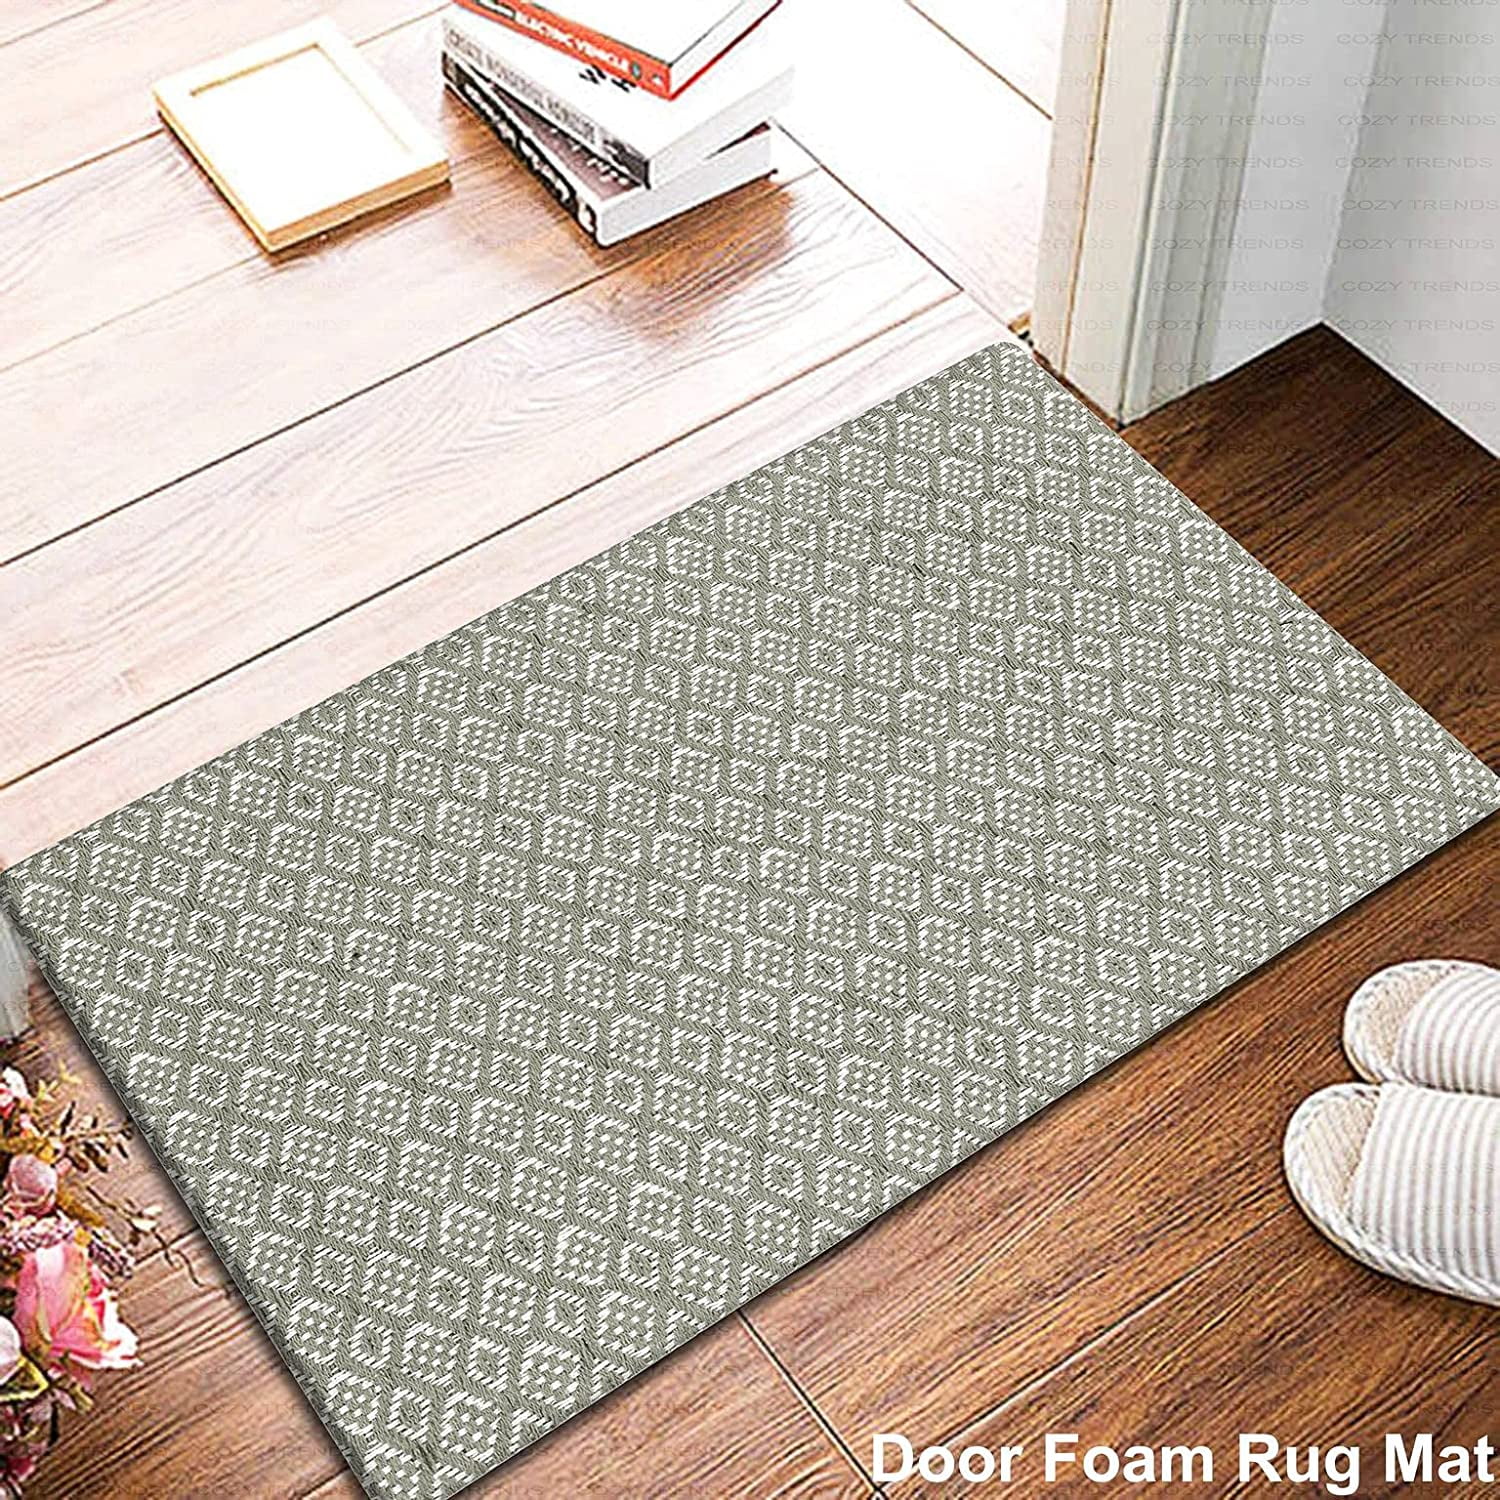 Thousands of  Shoppers Bought These Cushioned Kitchen Mats